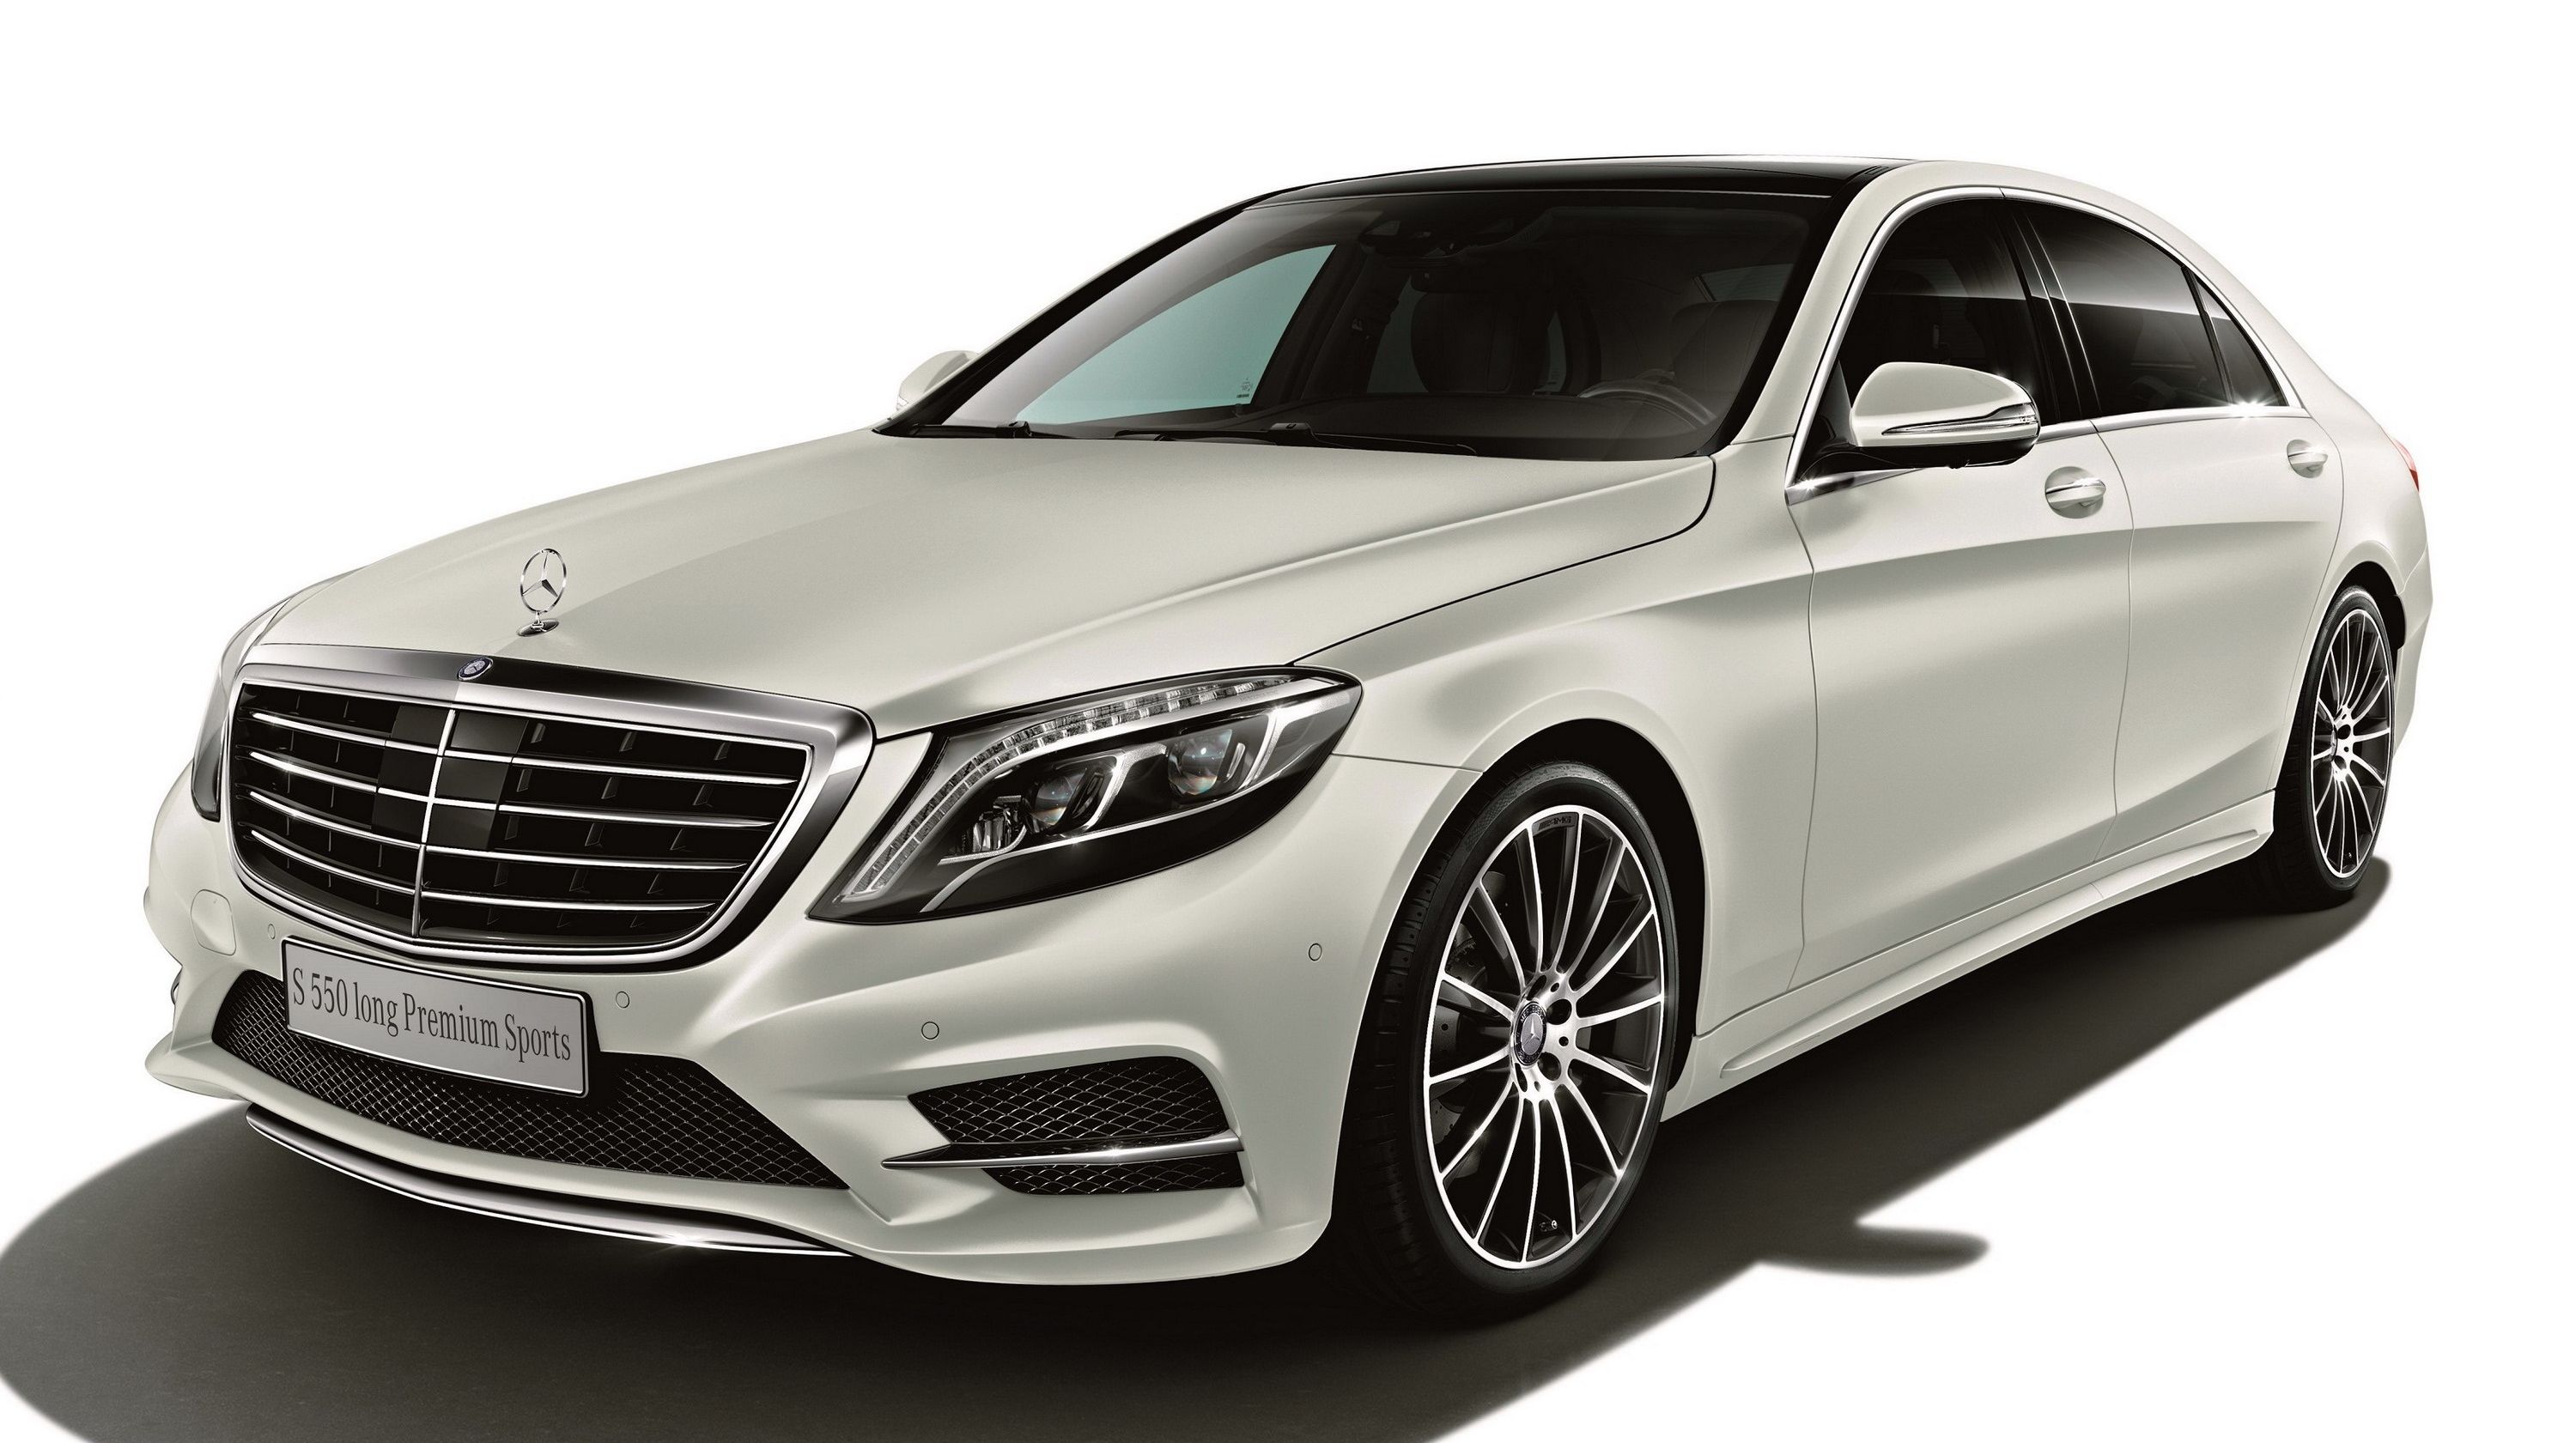  Japan is getting a special S550, are you considering a plane ticket yet?